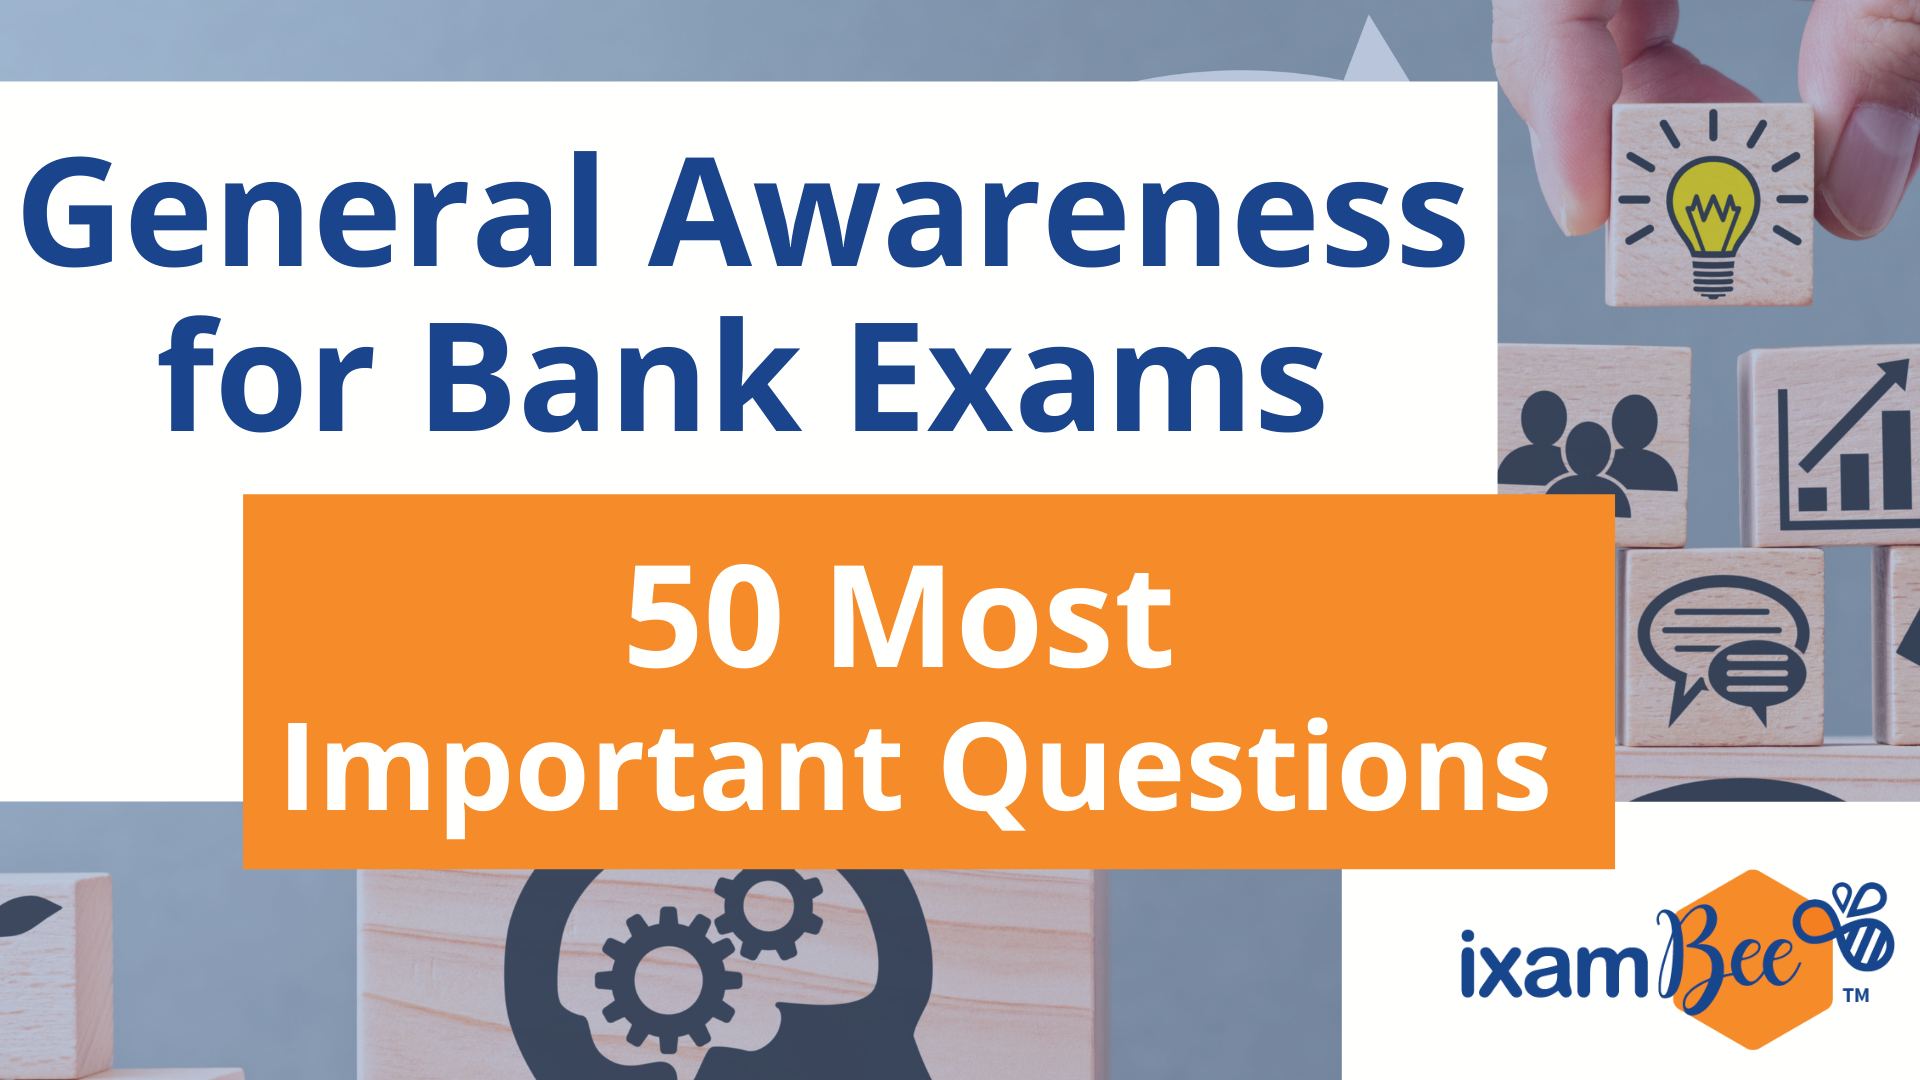 General Awareness for Bank Exams: 50 Most Important Questions